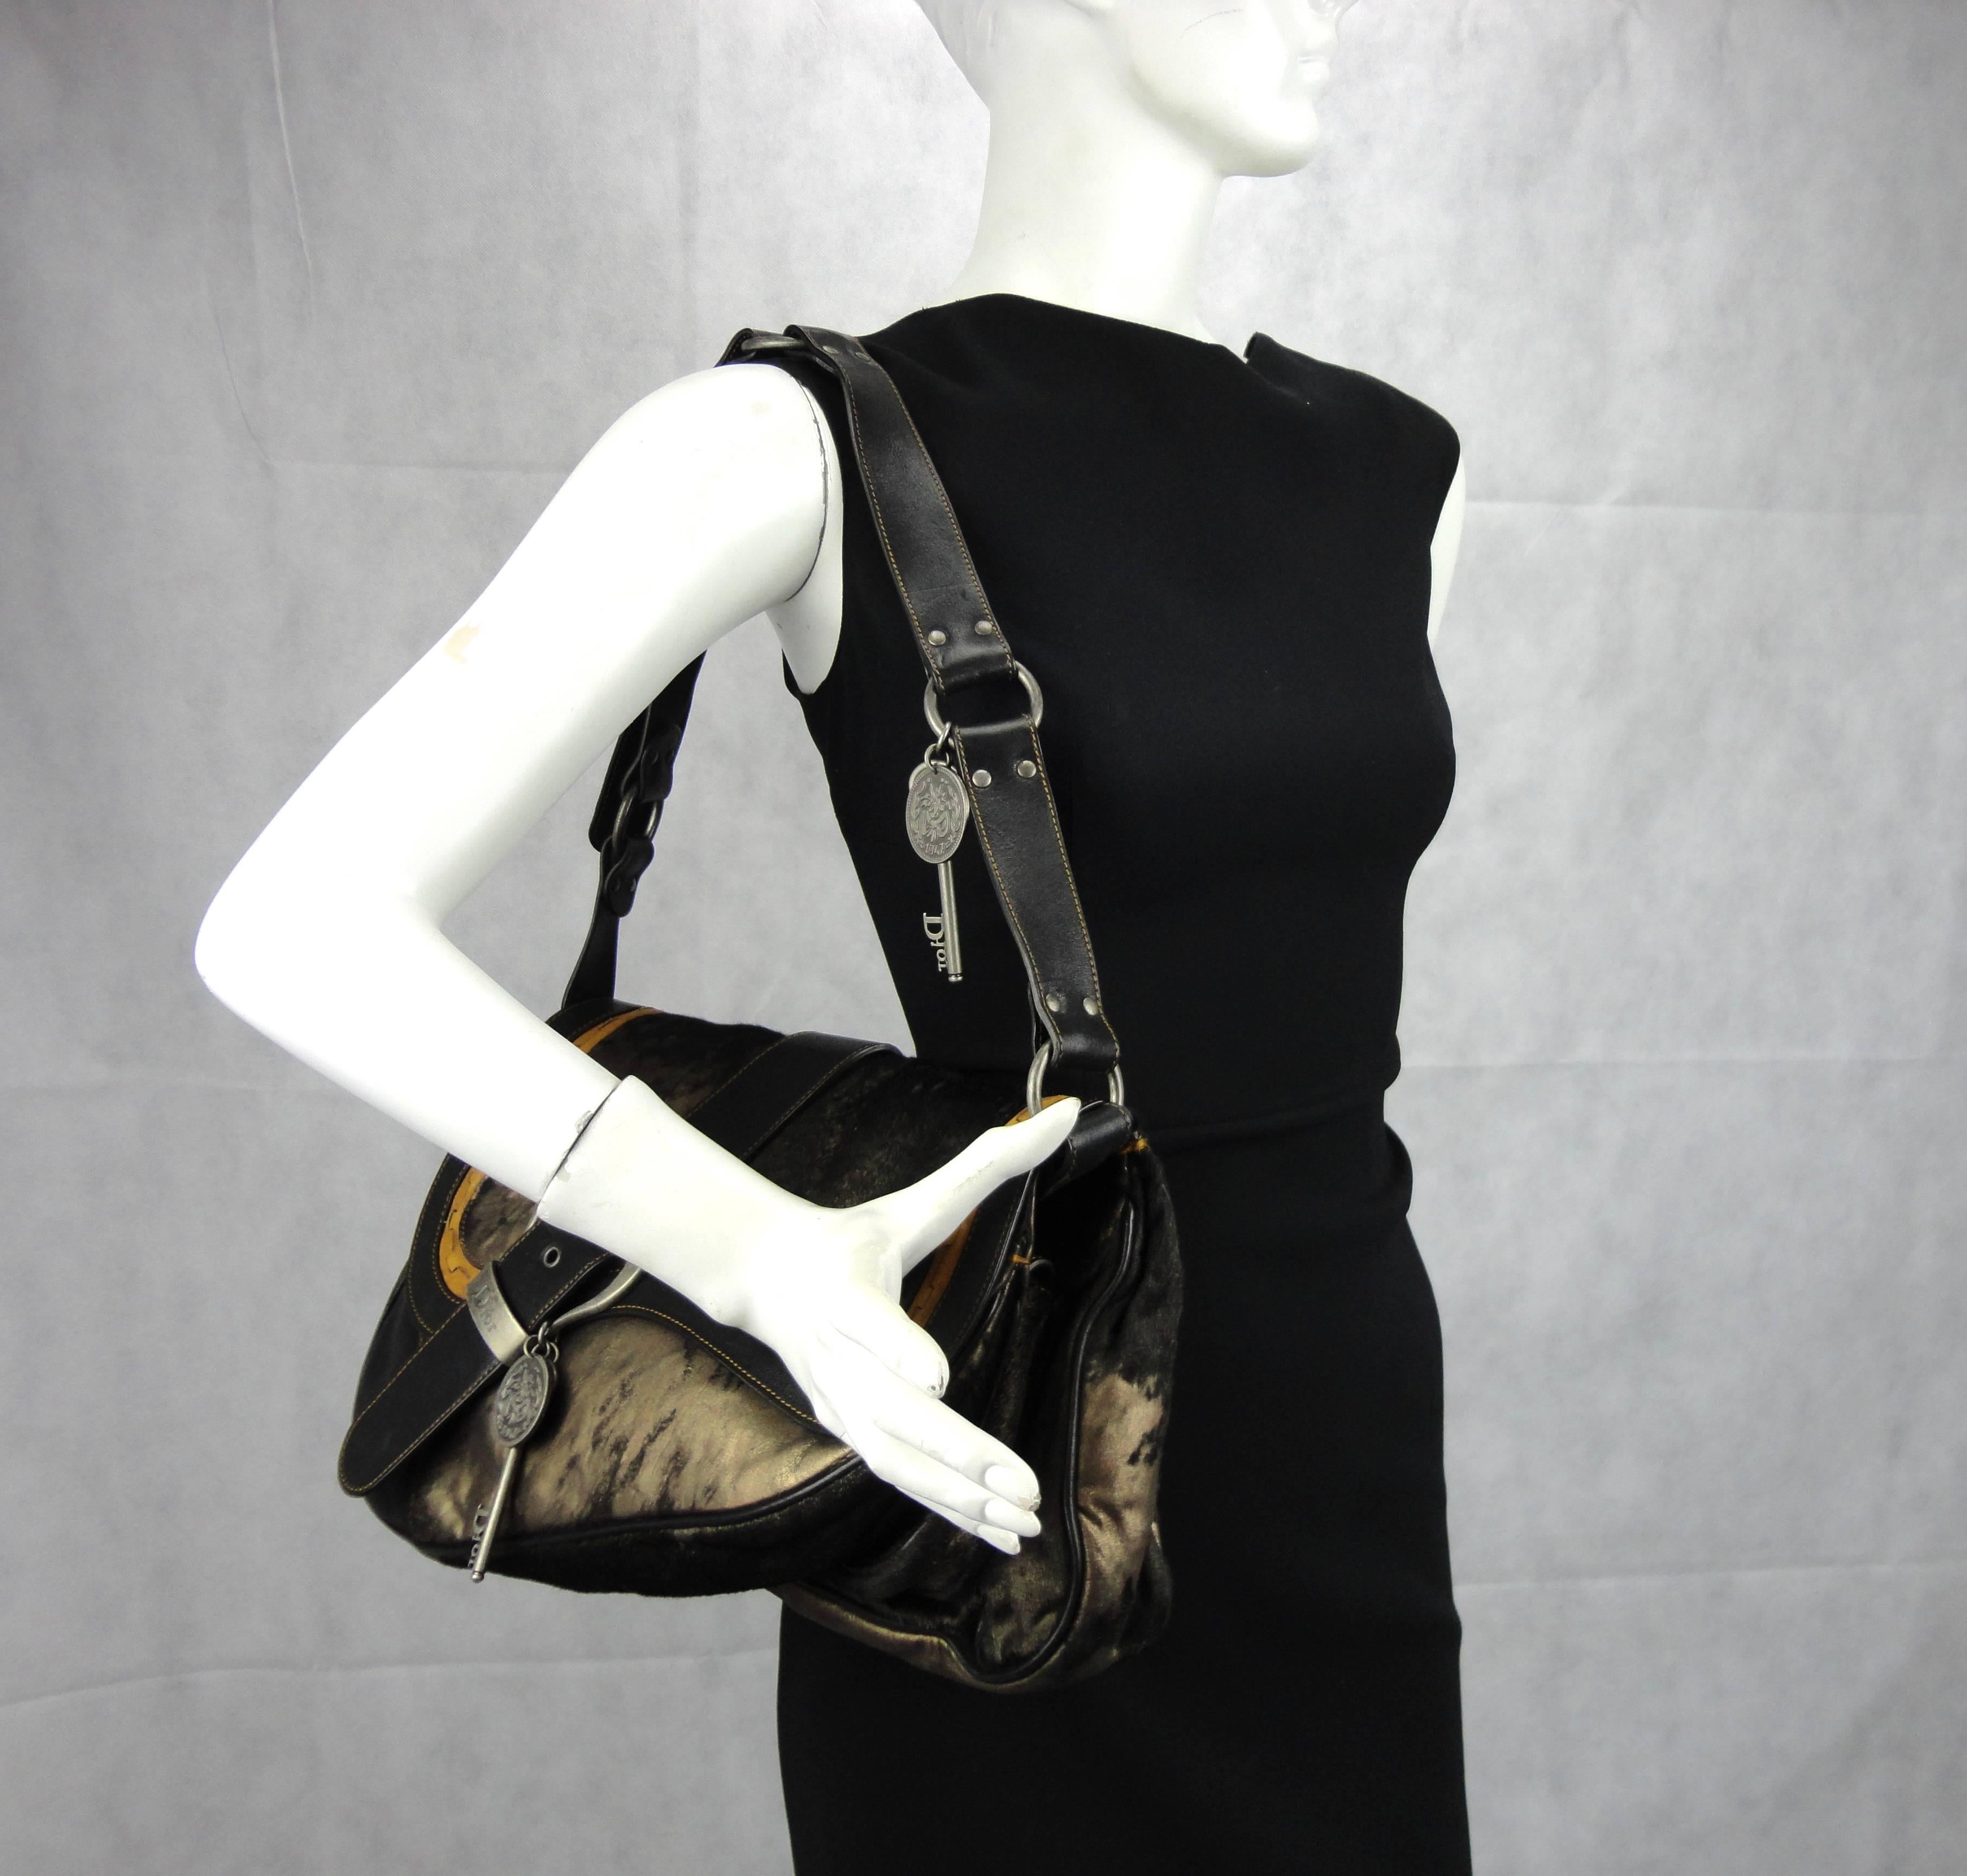 Christian Dior Gaucho double saddle bag in black pony skin with distressed gold leather. The fold over flap gives this bag a true saddle shape, the exterior is clean and beautiful without any signs of wear and the interior is also in mint condition.